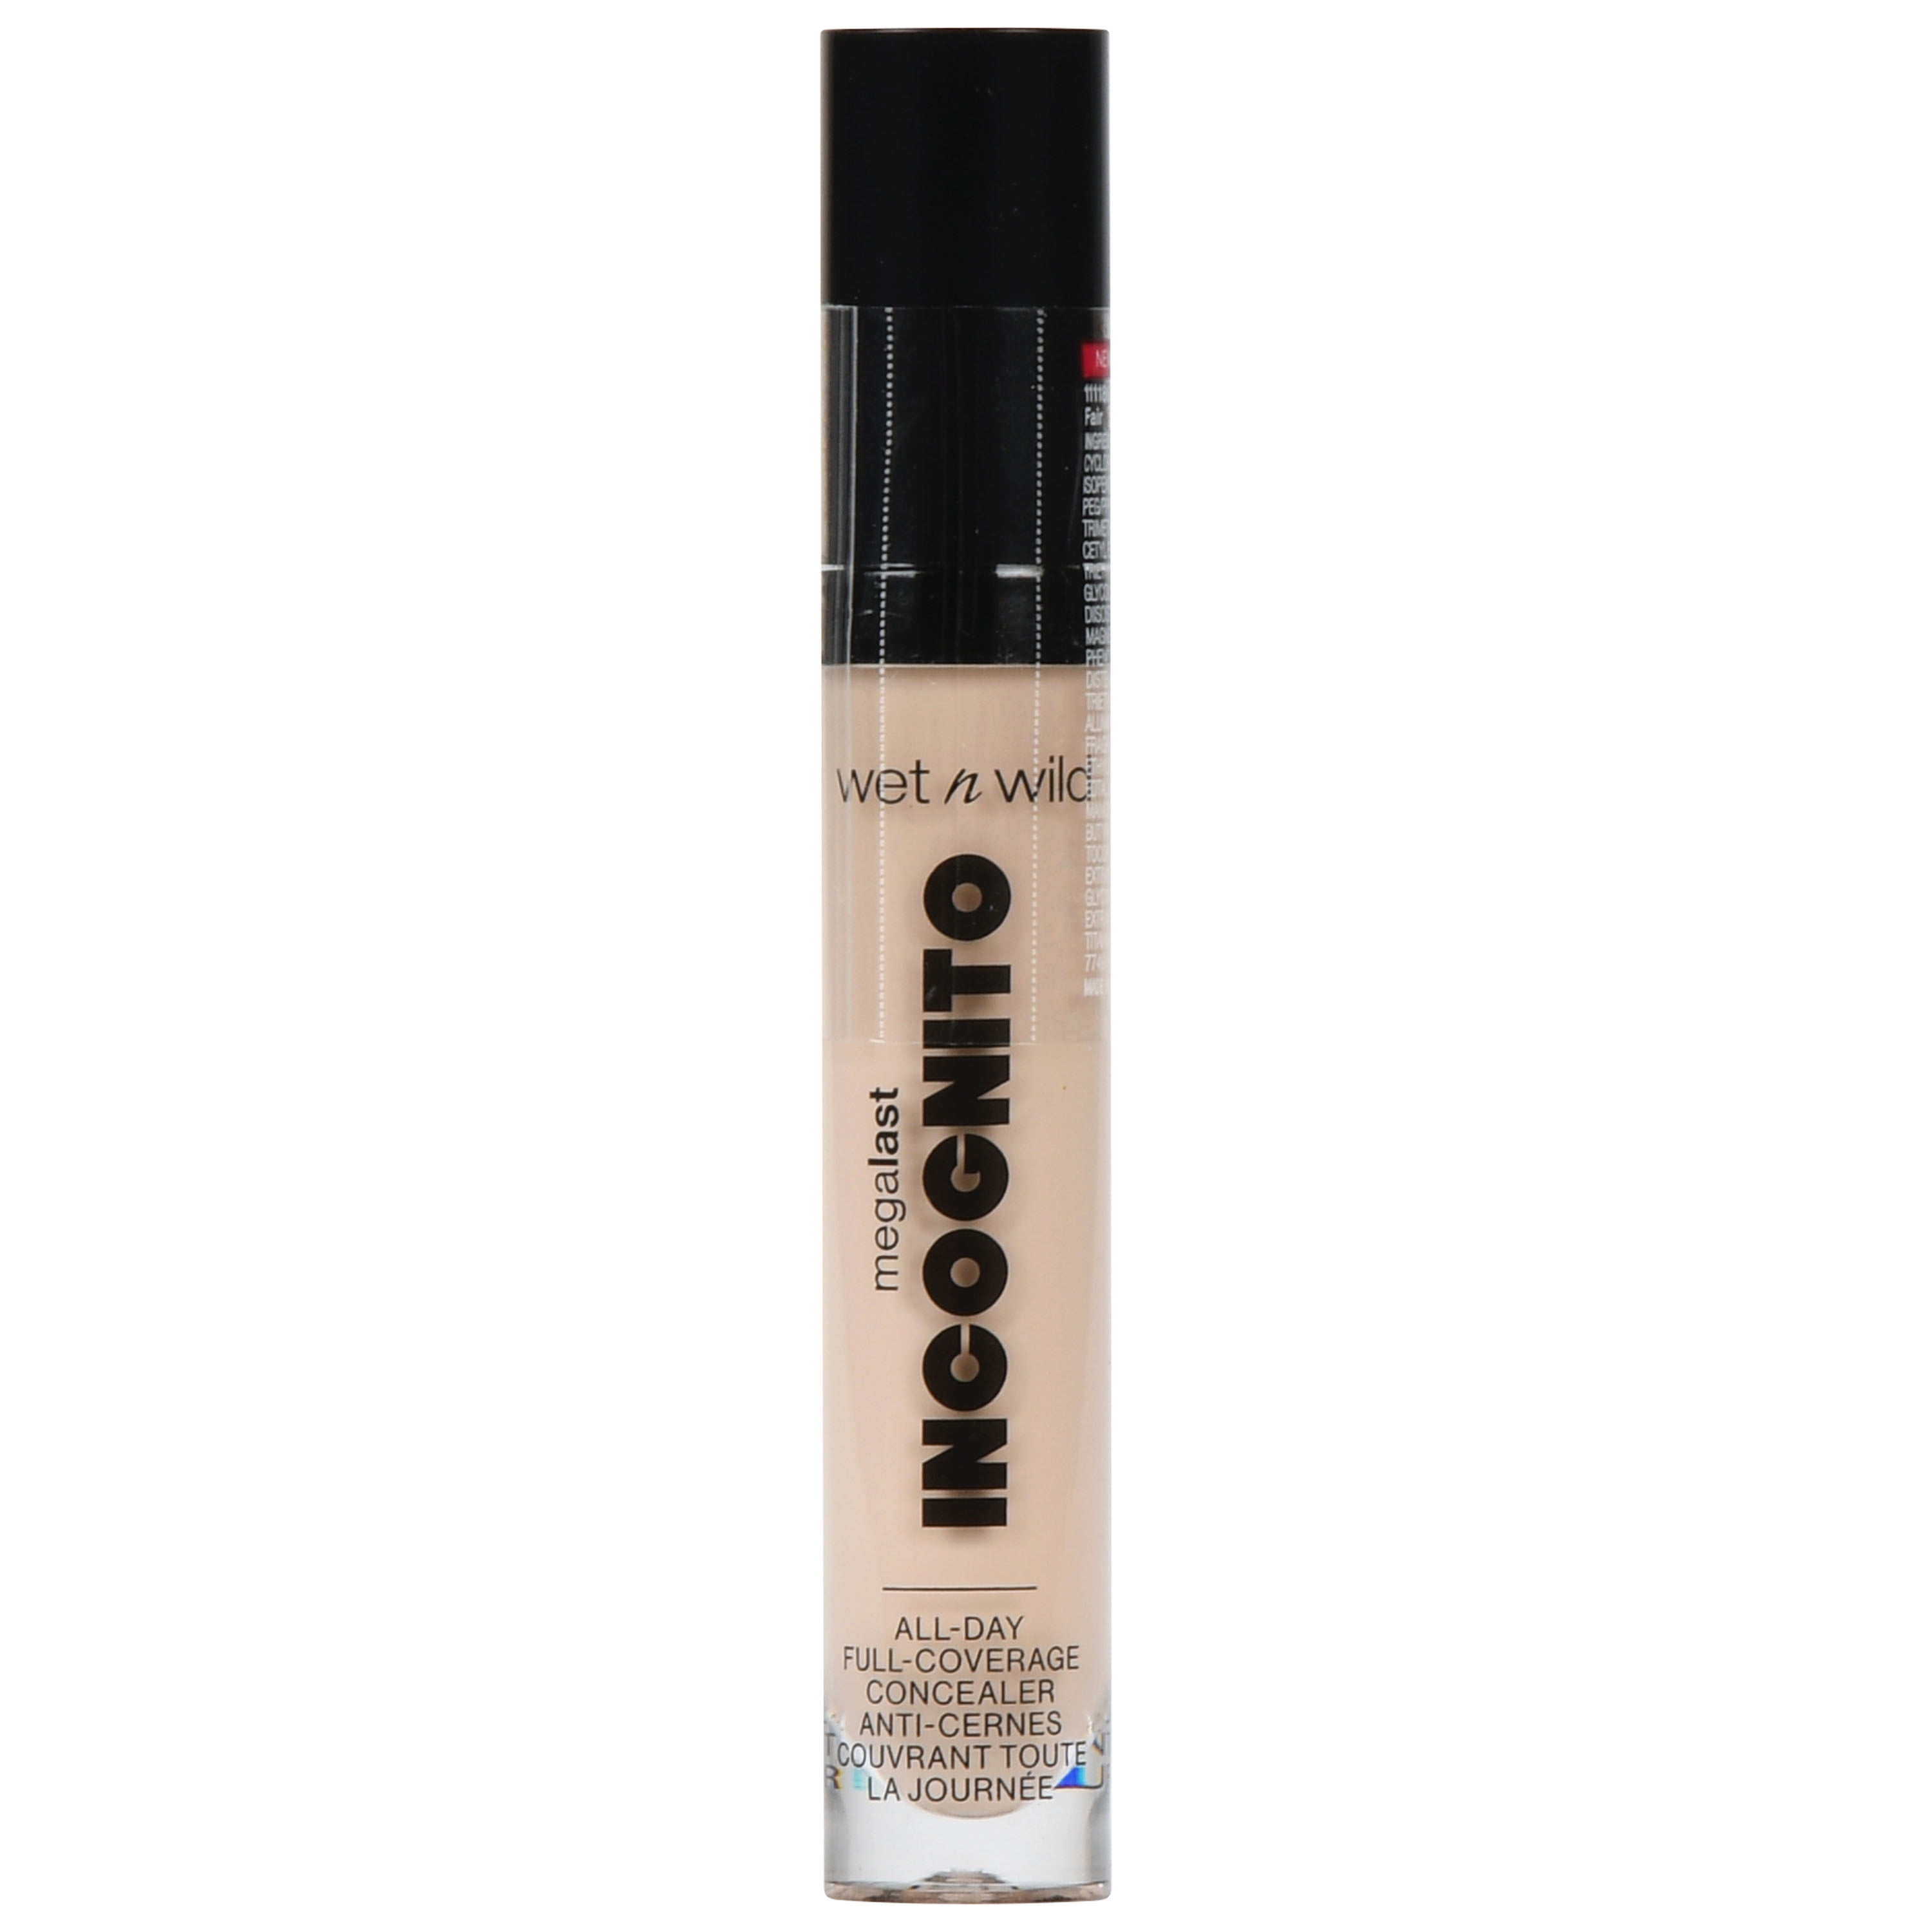 wet n wild MegaLast Incognito Full Coverage Concealer, 16-Hour Wear, Fair, 0.18 oz